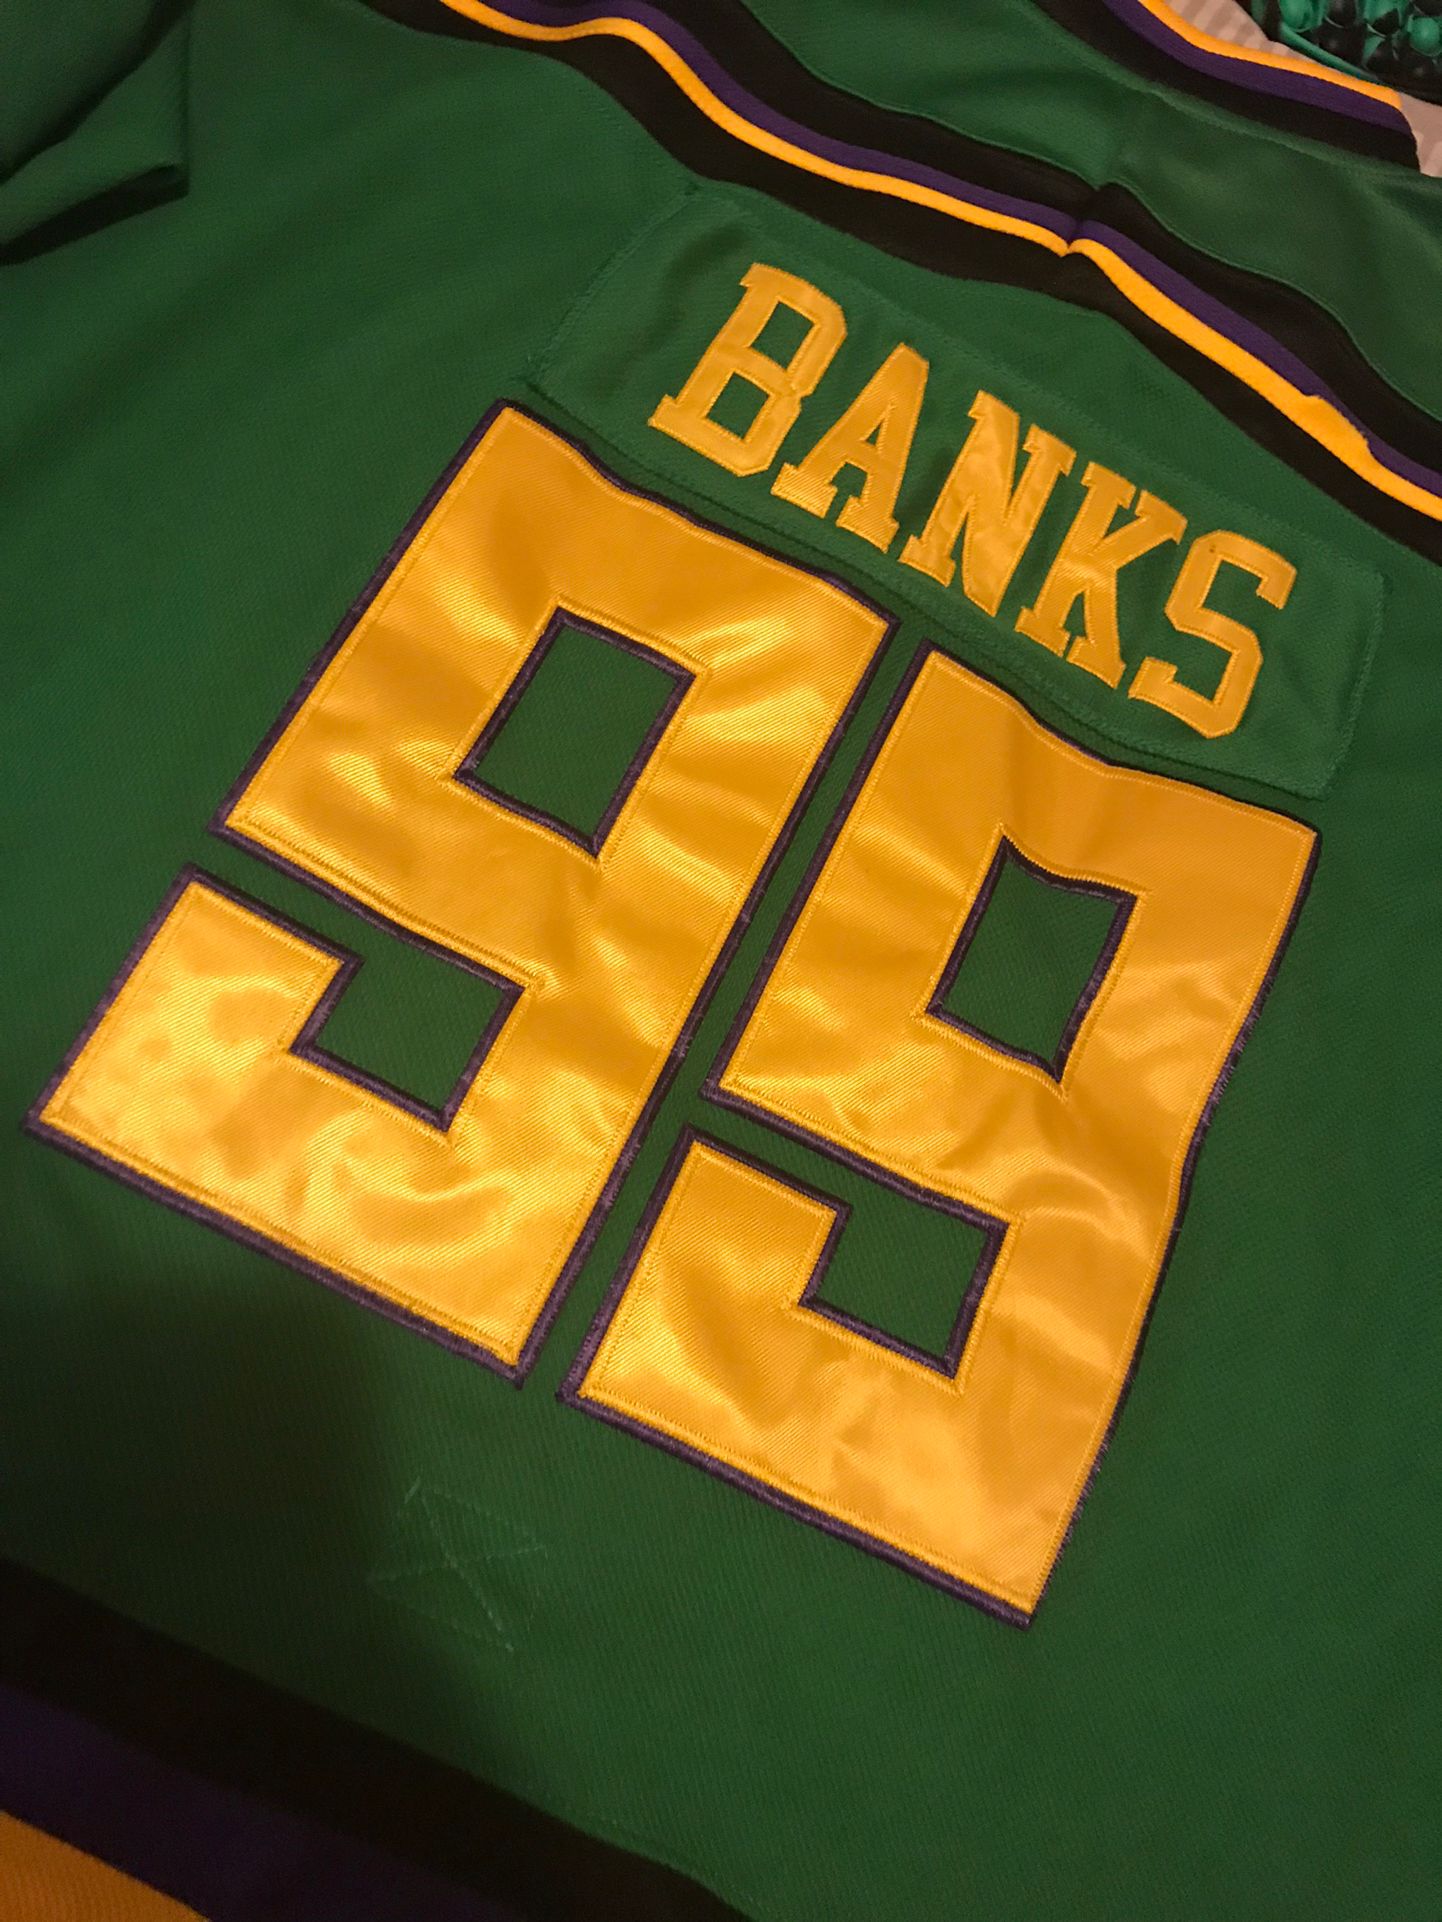 Adam Banks 'The Mighty Ducks' movie-worn jersey for sale in